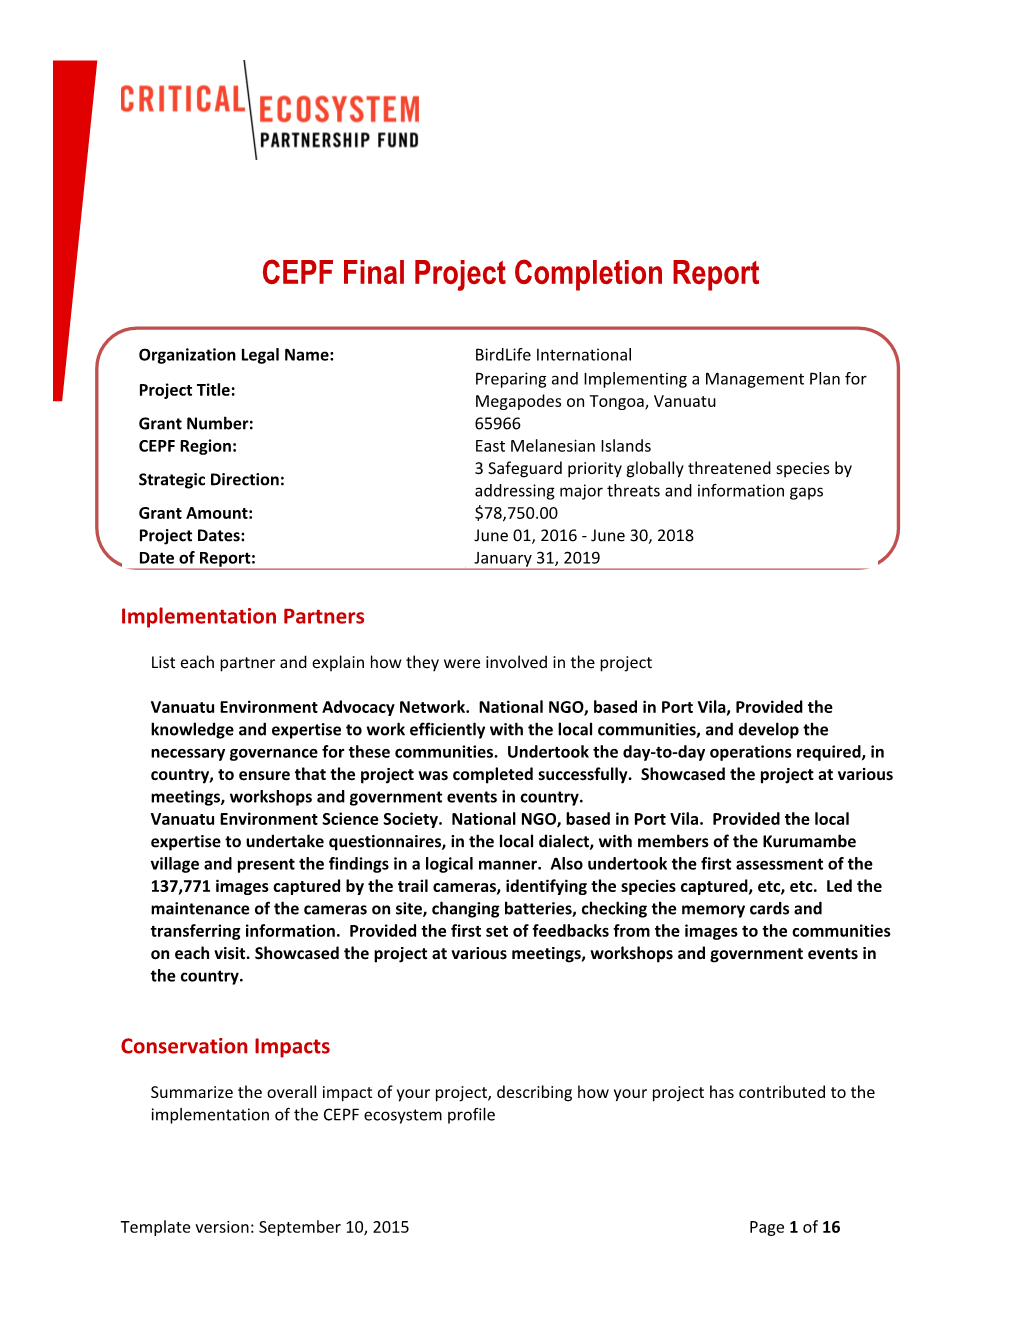 CEPF Final Project Completion Report